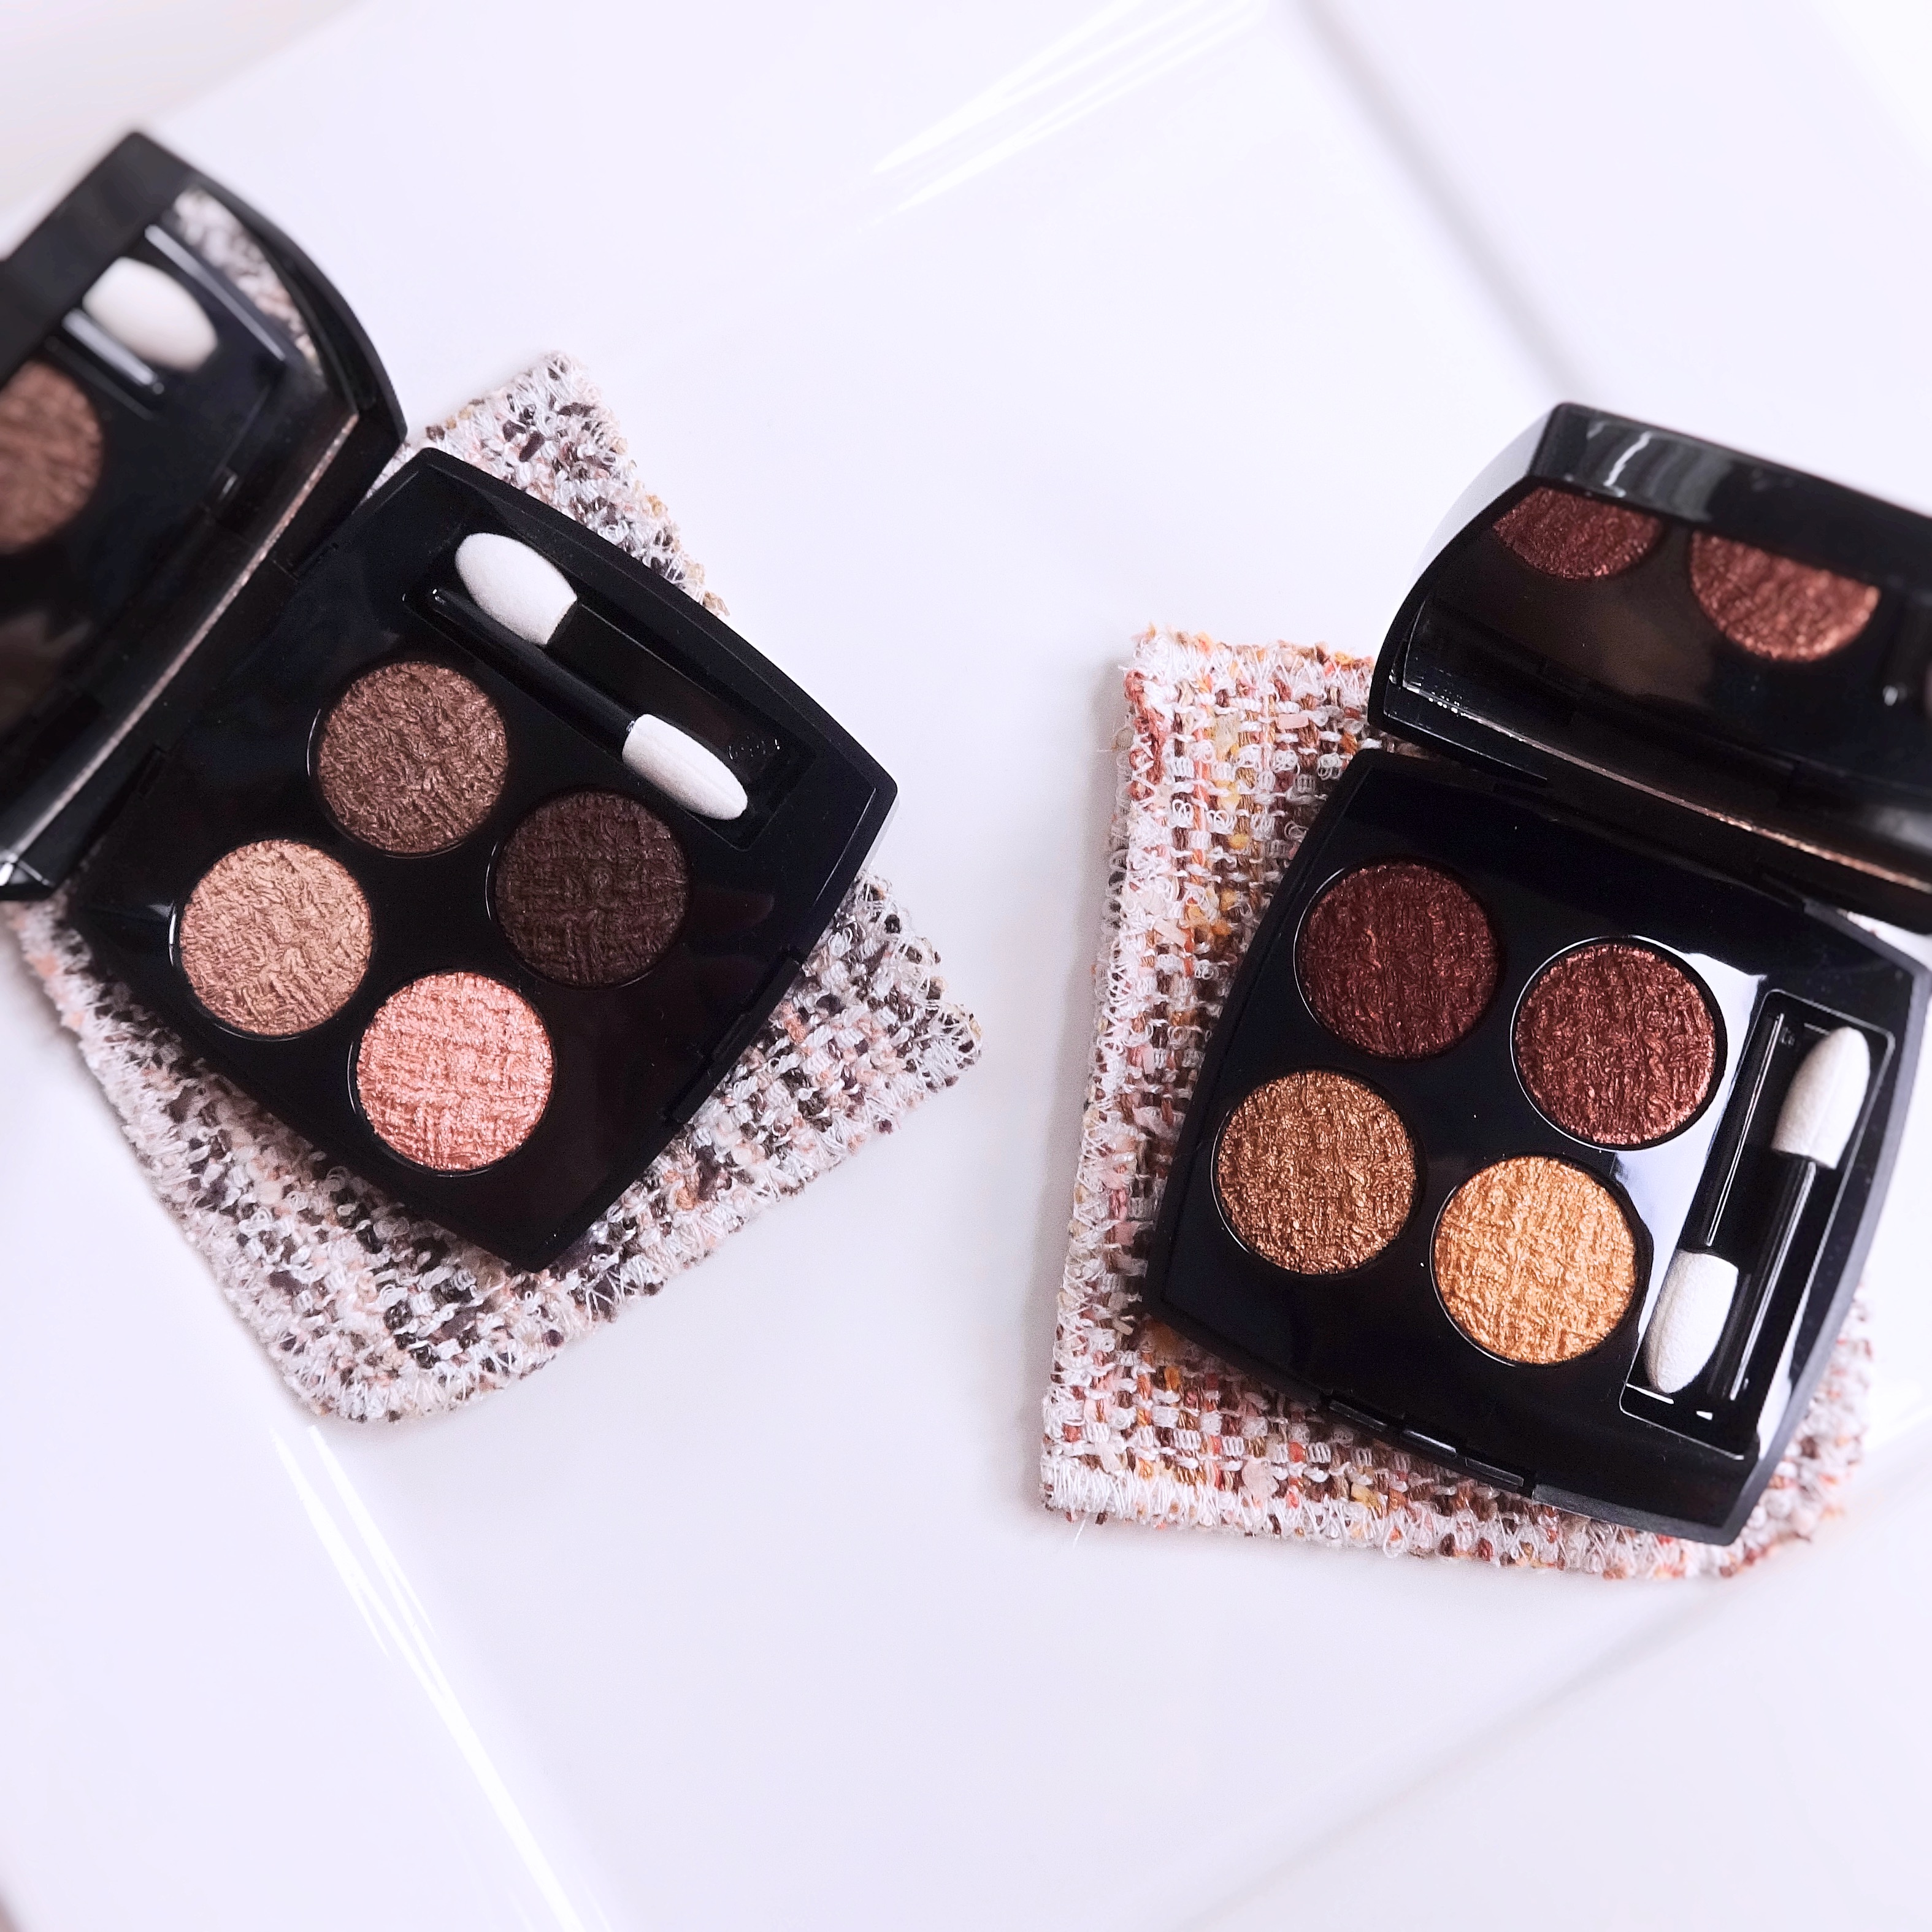 Chanel Tisse Paris (238) Les 4 Ombres Eyeshadow Quad Review, Photos,  Swatches